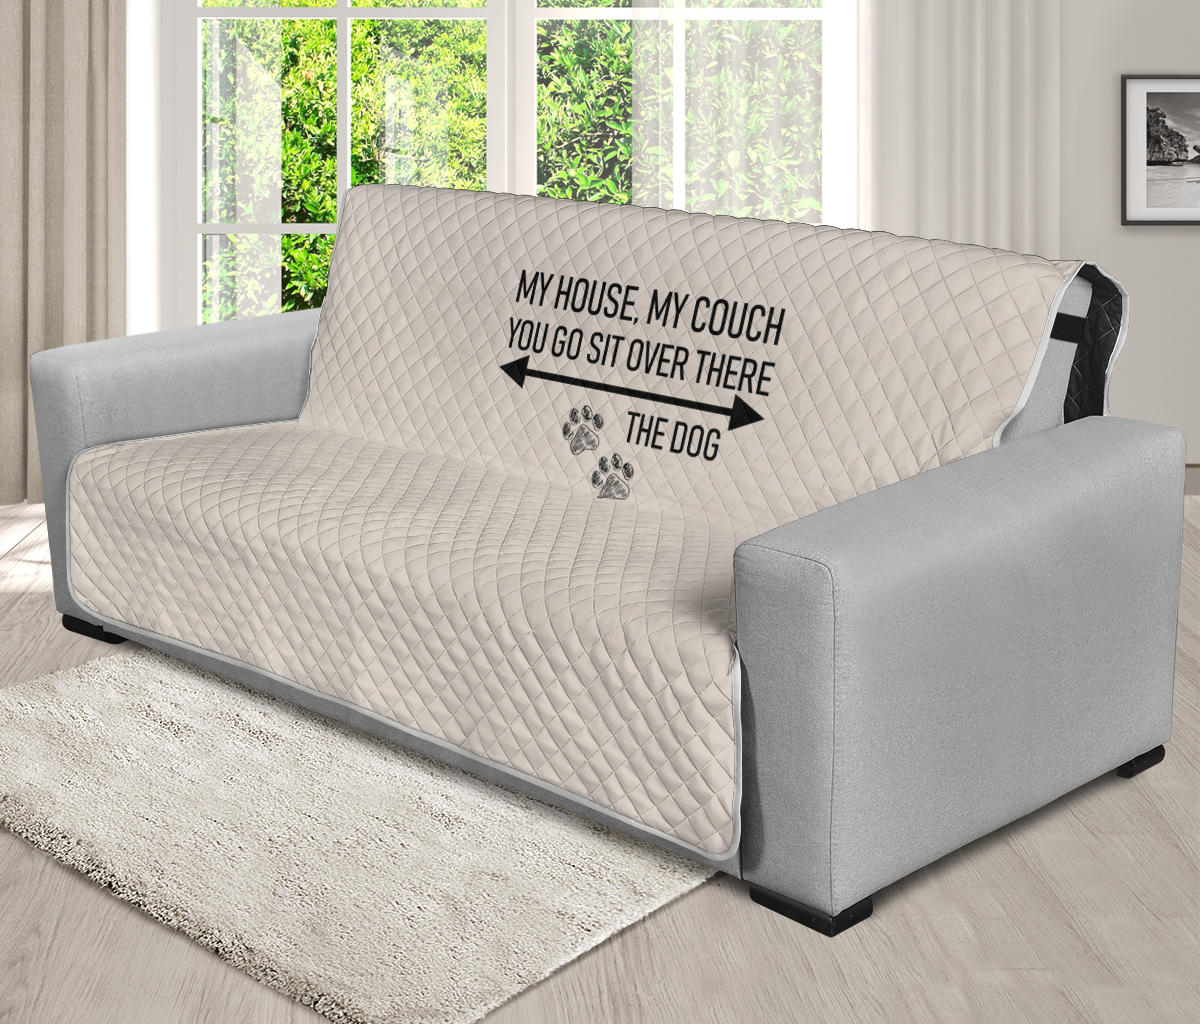 Furniture Protector - Futon - My House, My Couch